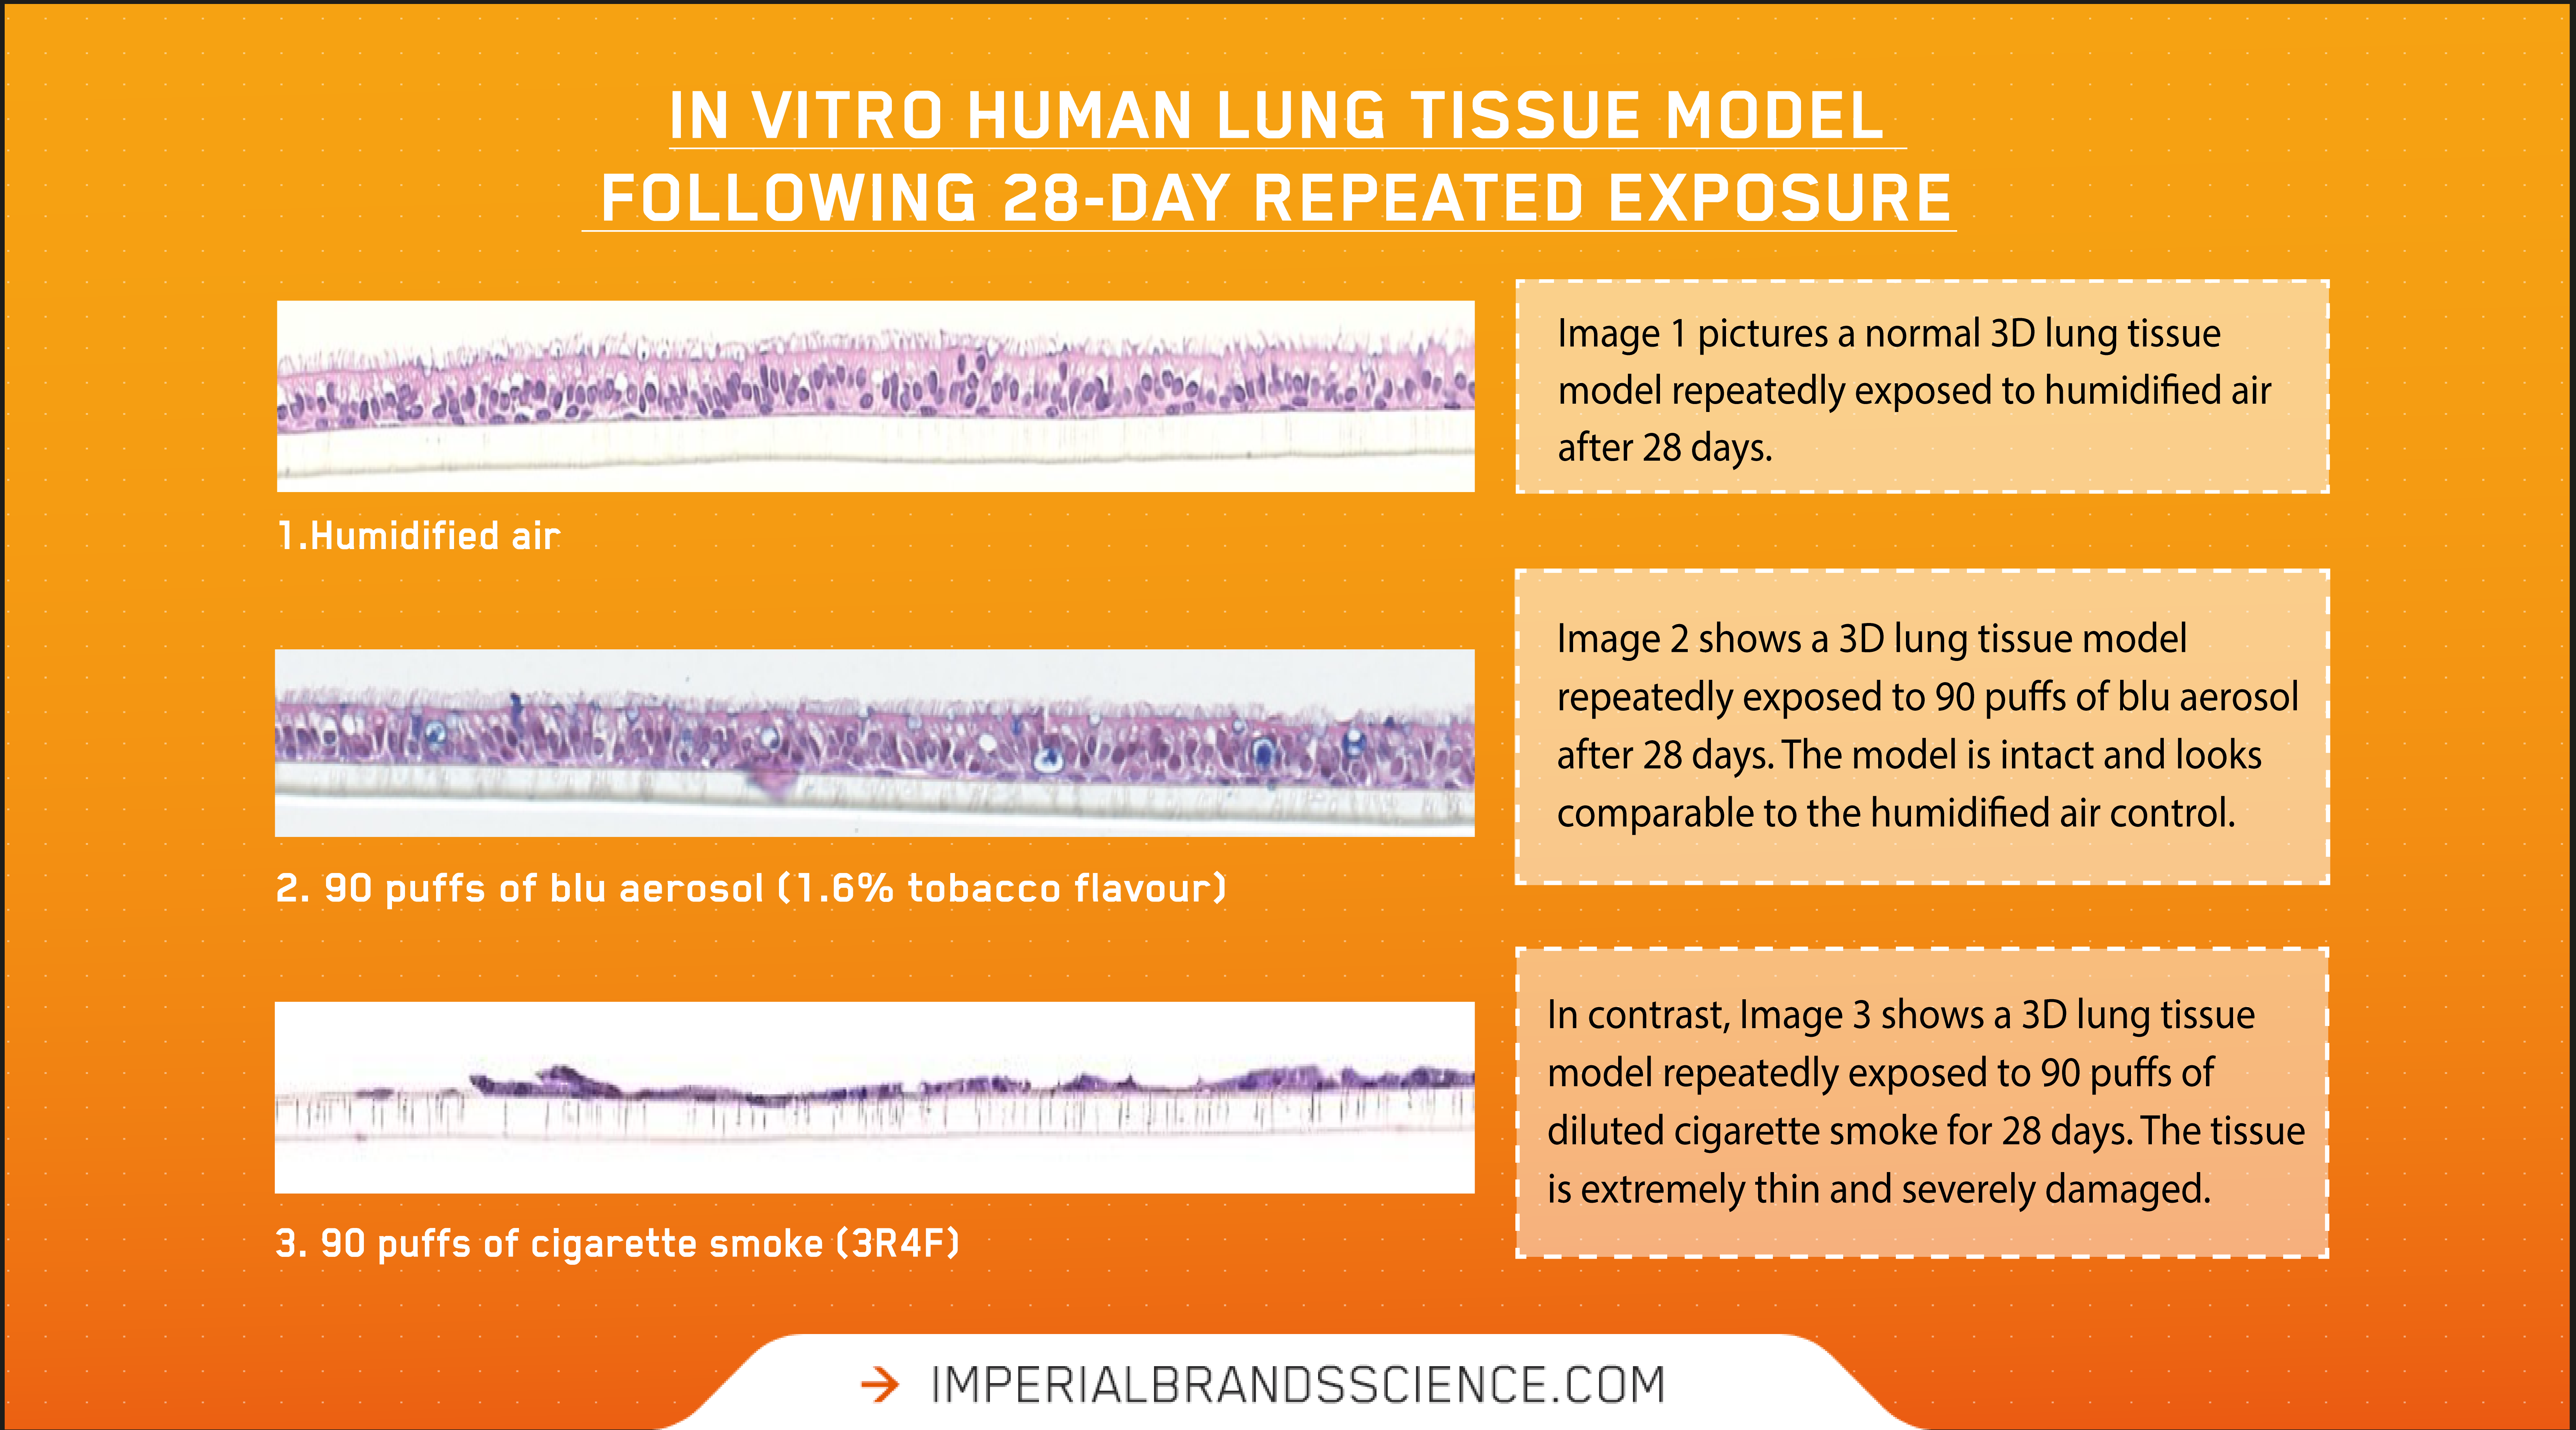 In-vitro research shows repeat vape aerosol exposure causes minimal damage in human 3D lung tissue lab model compared to cigarette smoke